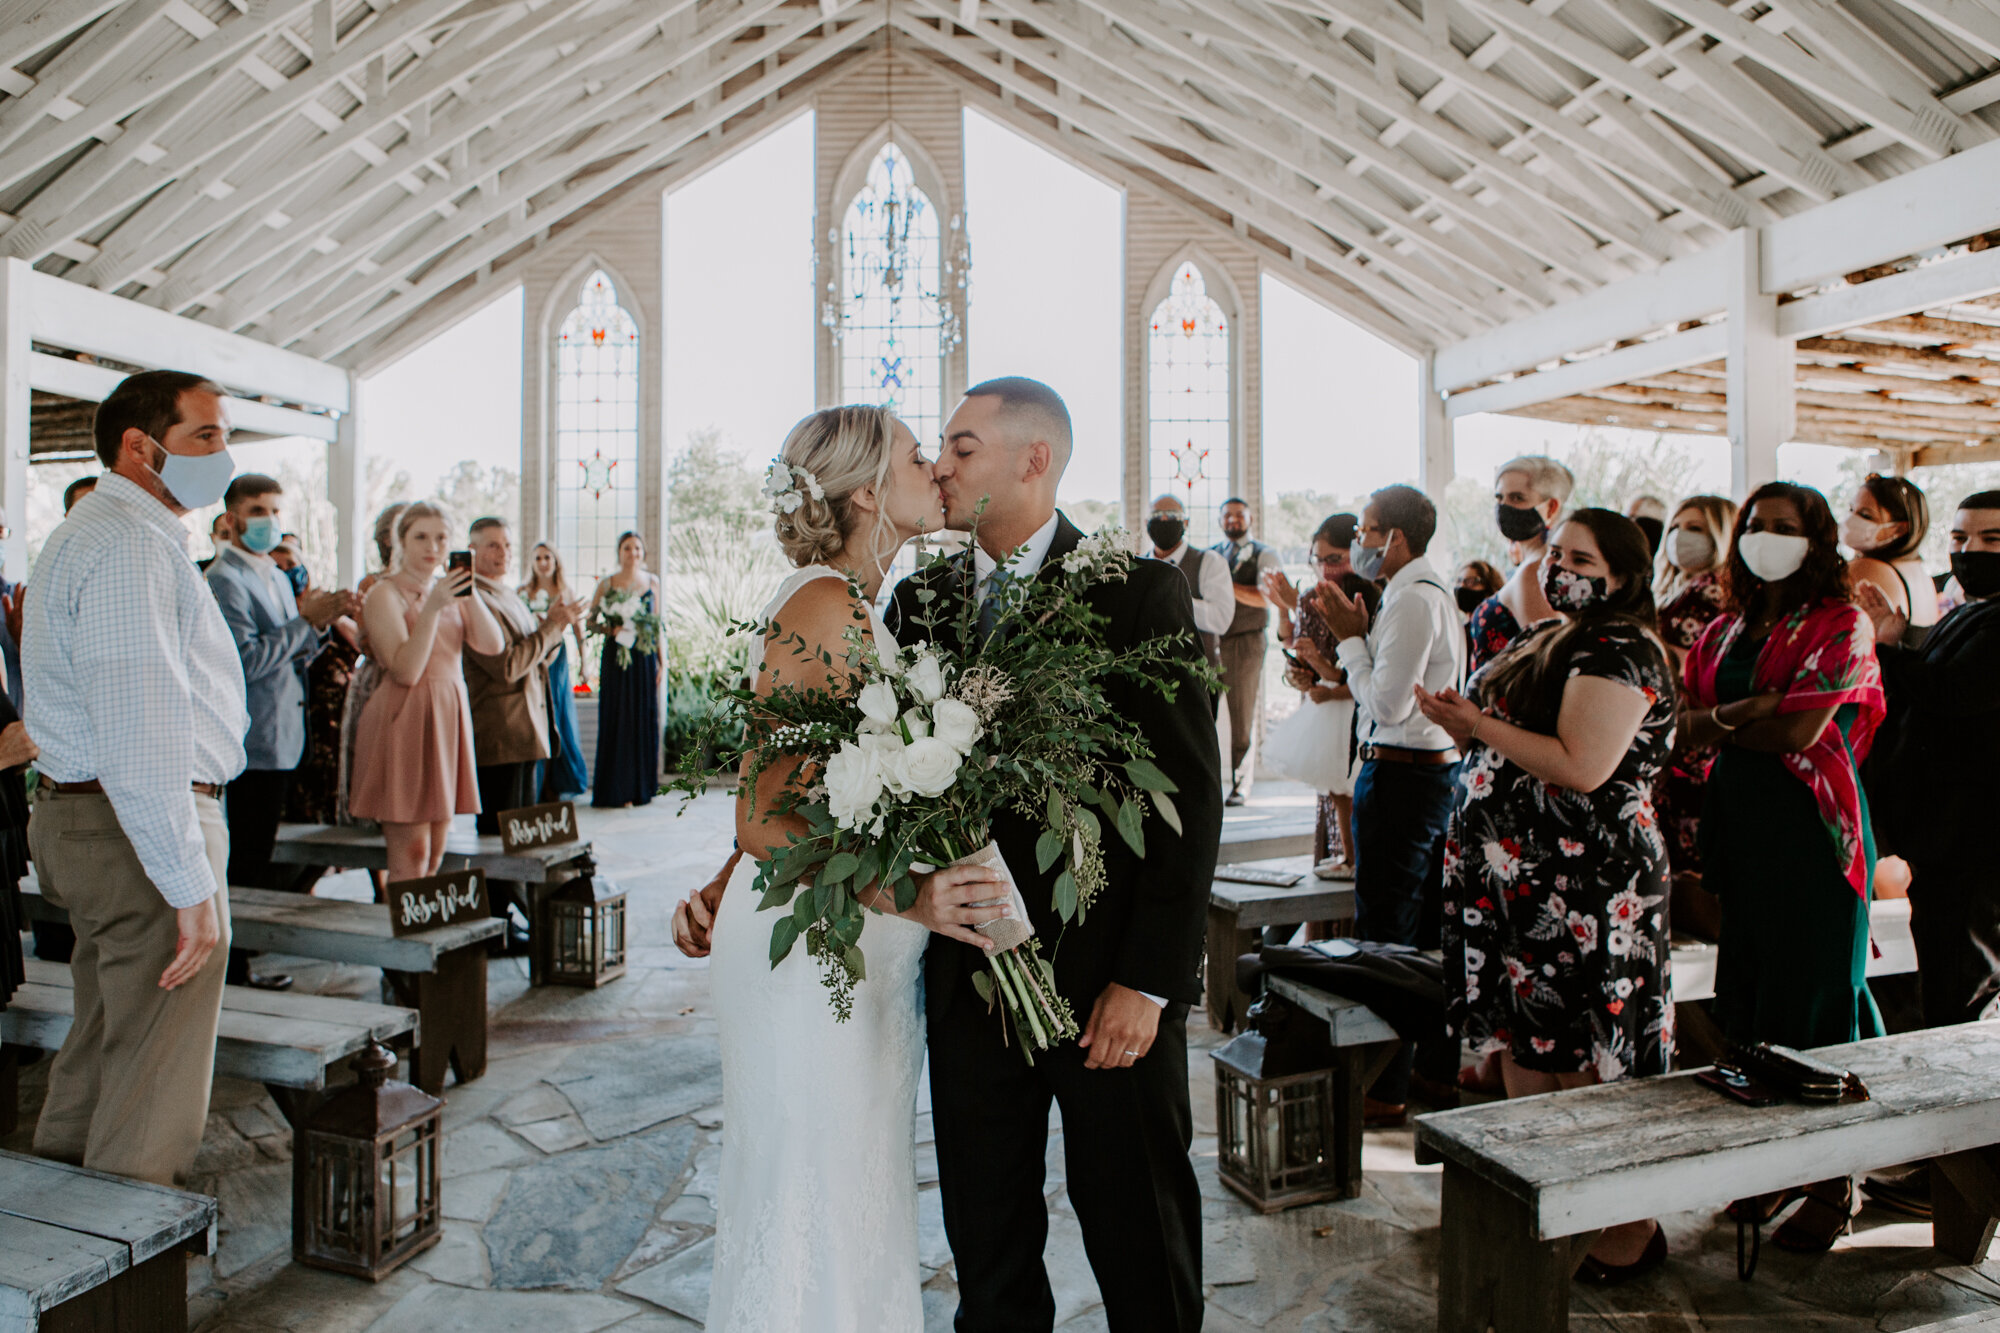 Bride and groom walking down the aisle kissing. Radiant Bohemian Hill Country Wedding at Gruene Estate in New Braunfels, TX